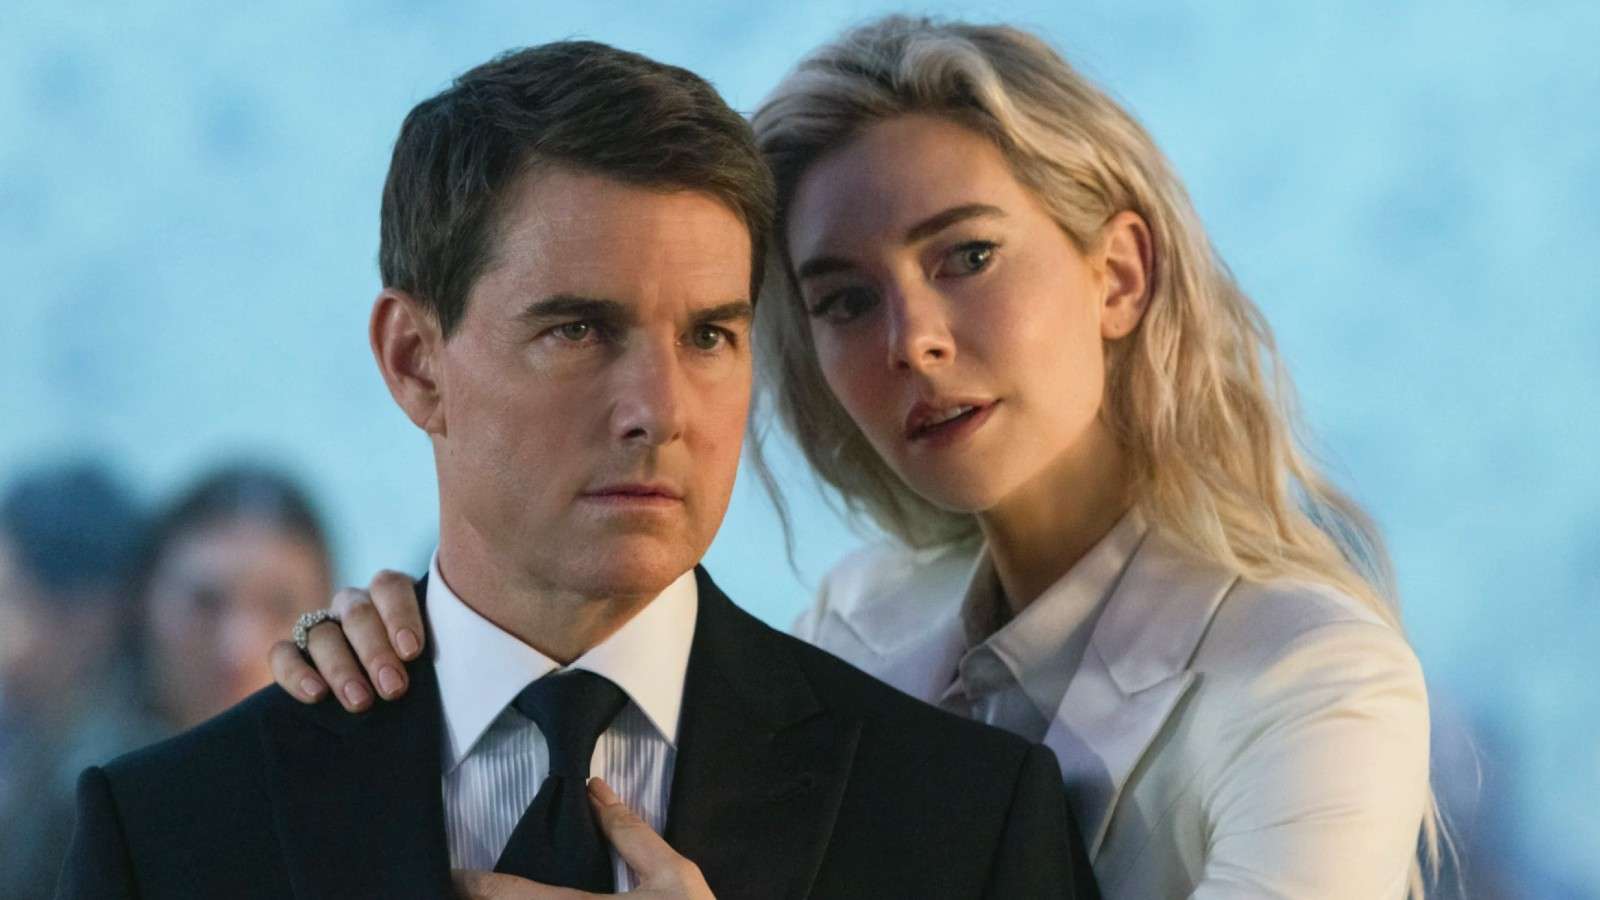 Tom Cruise and Vanessa Kirby in Mission: Impossible - Dead Reckoning Part 1